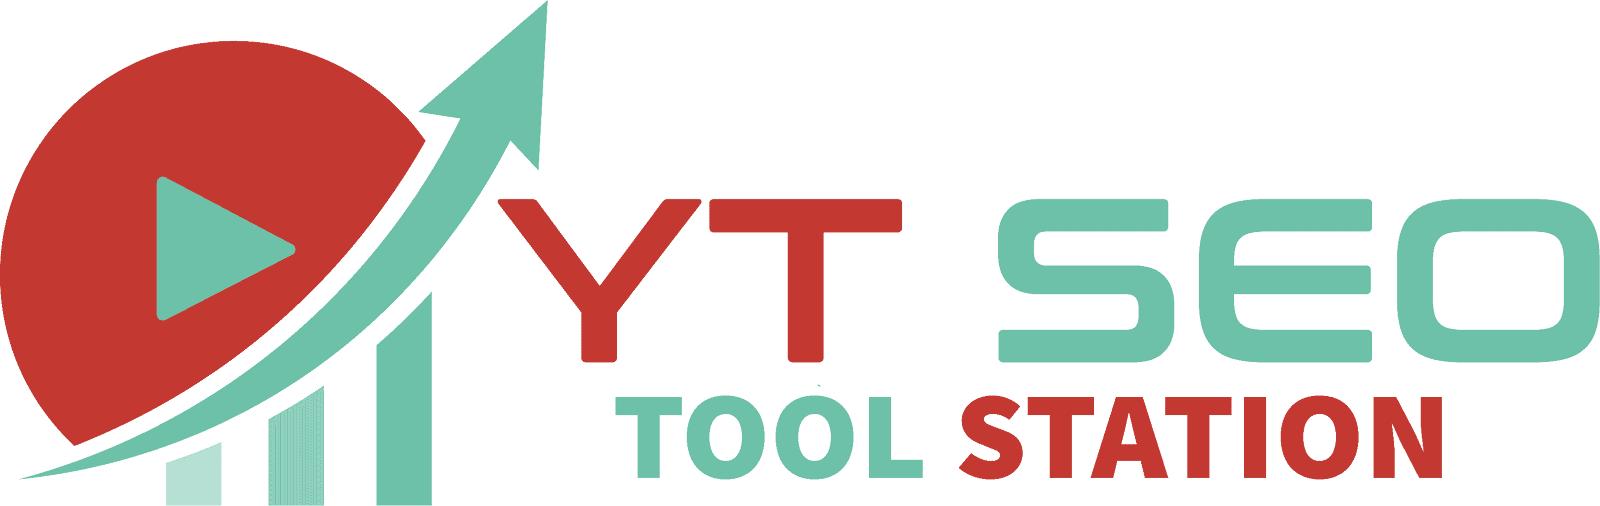 YT Seo Tool Station - 100% Free Best Online YouTube SEO Tools